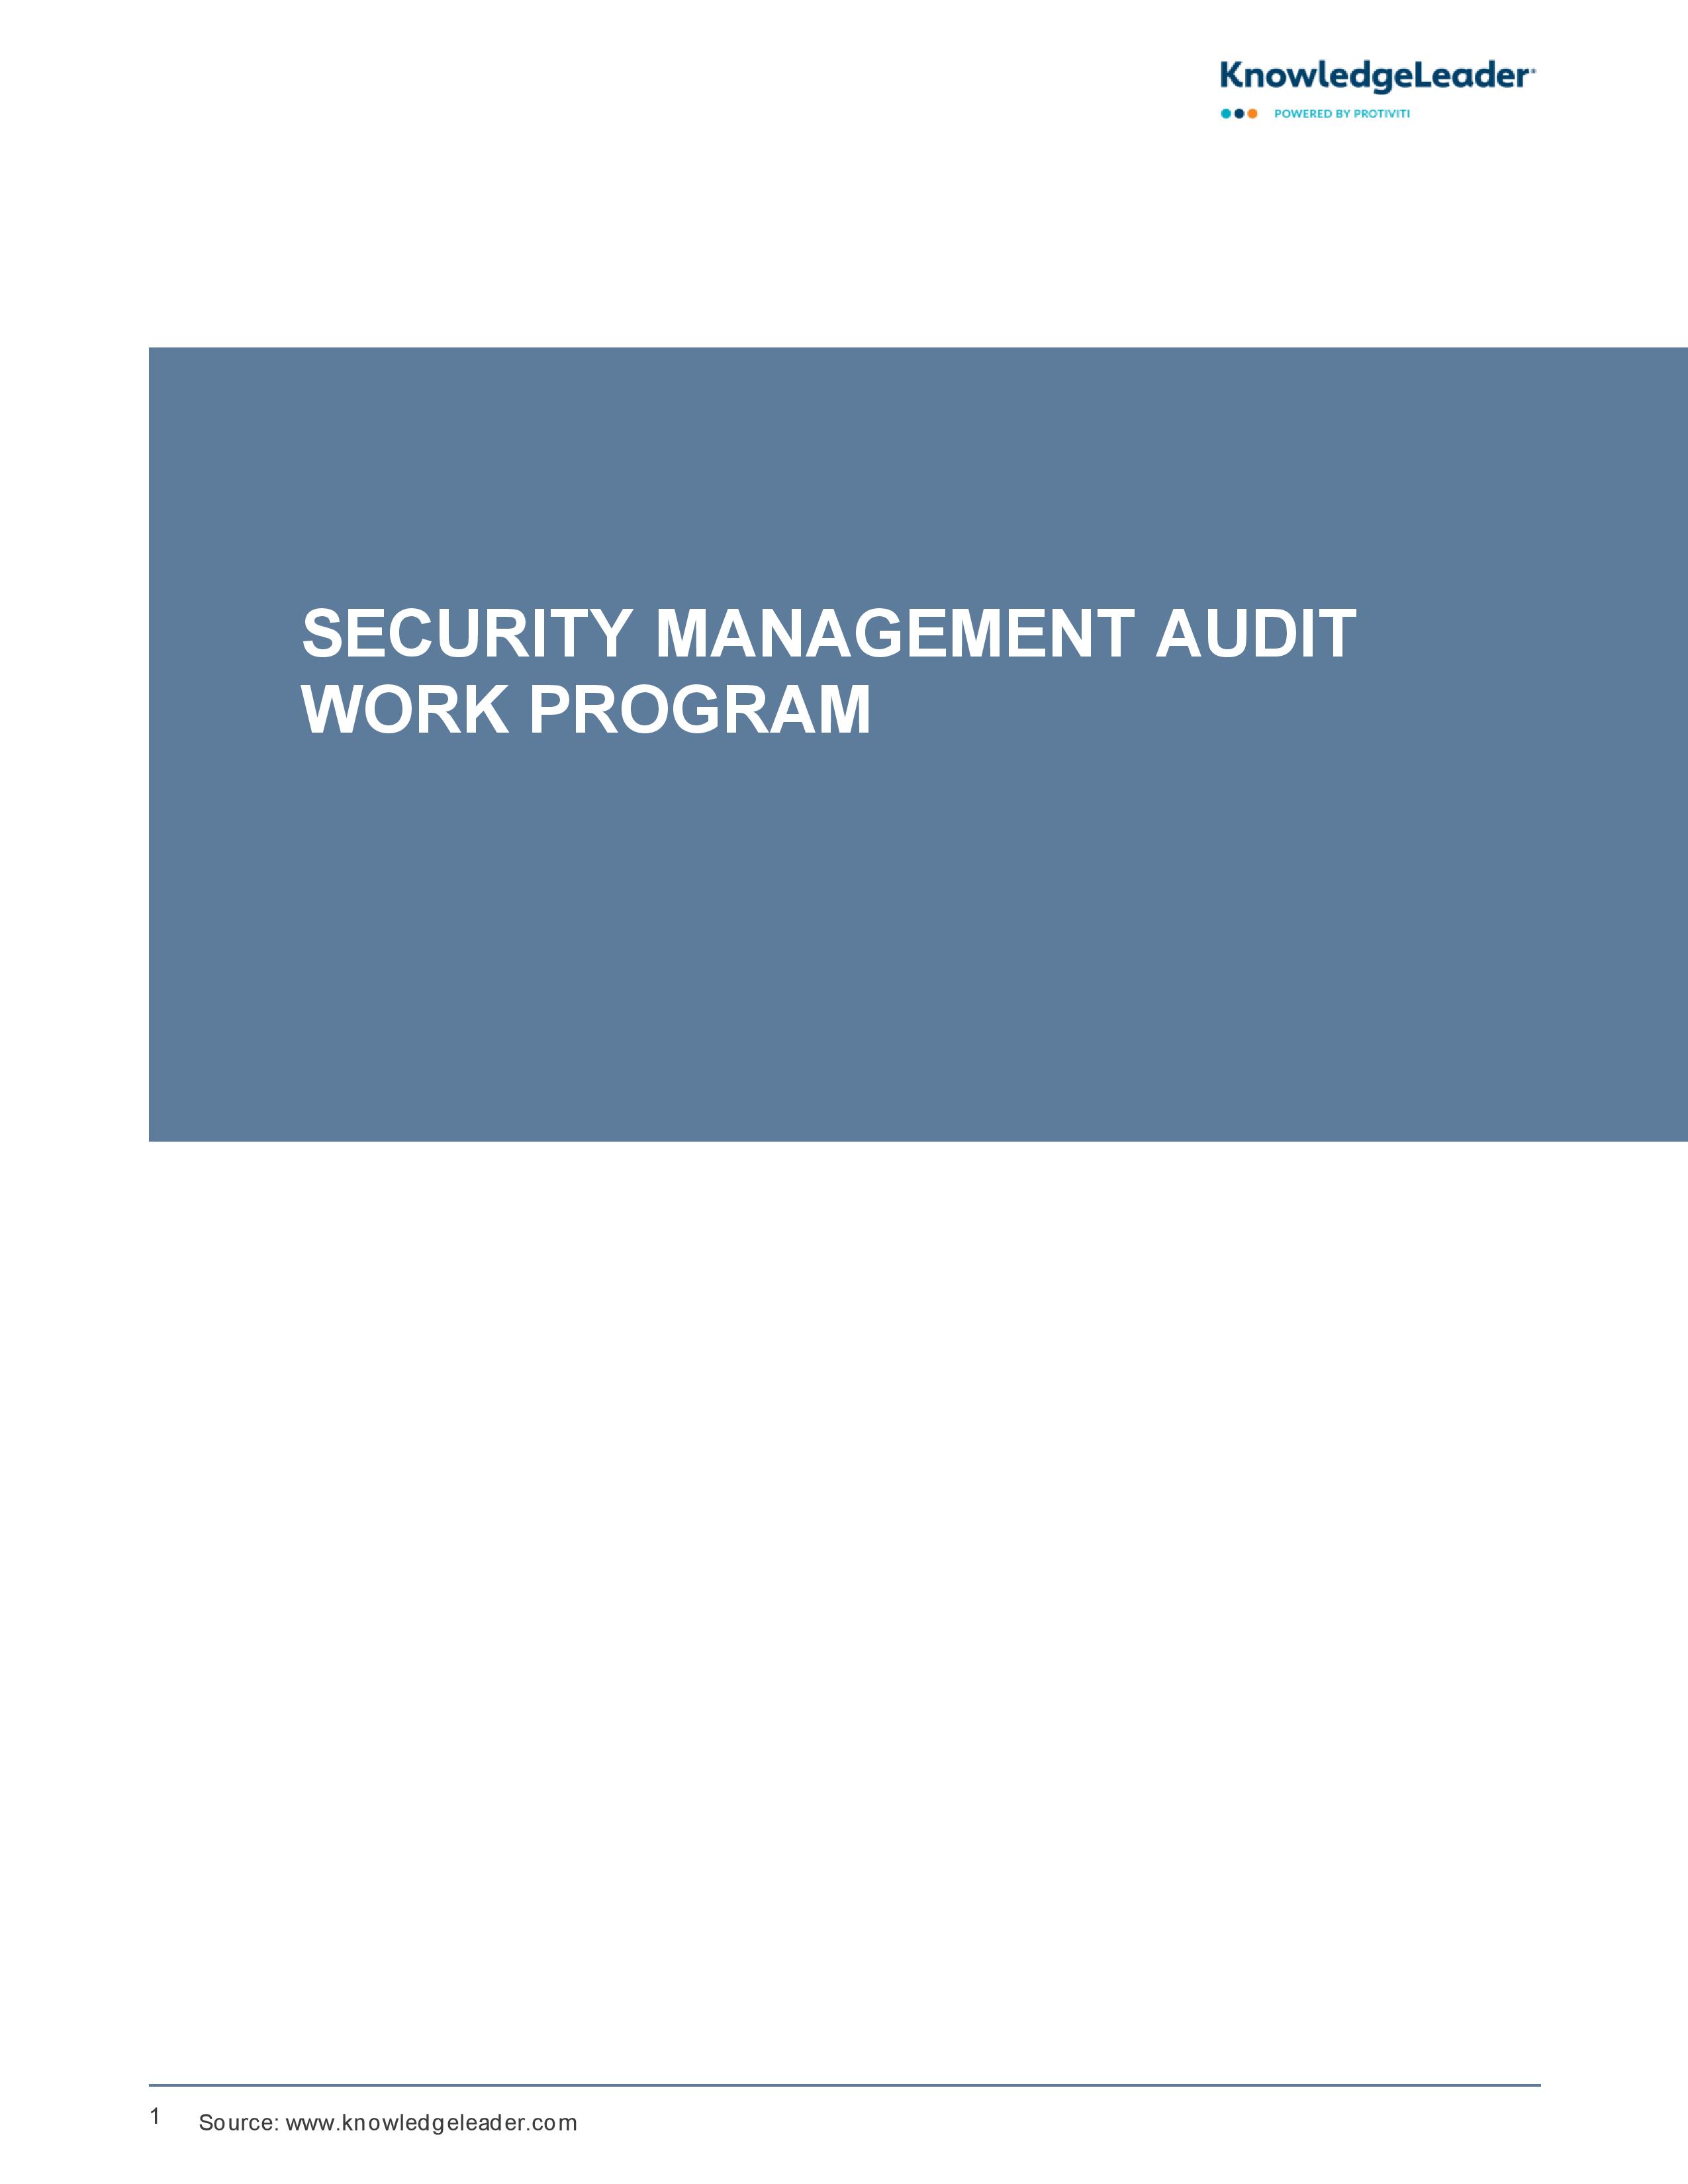 Screenshot of the first page of Security Management Audit Work Program